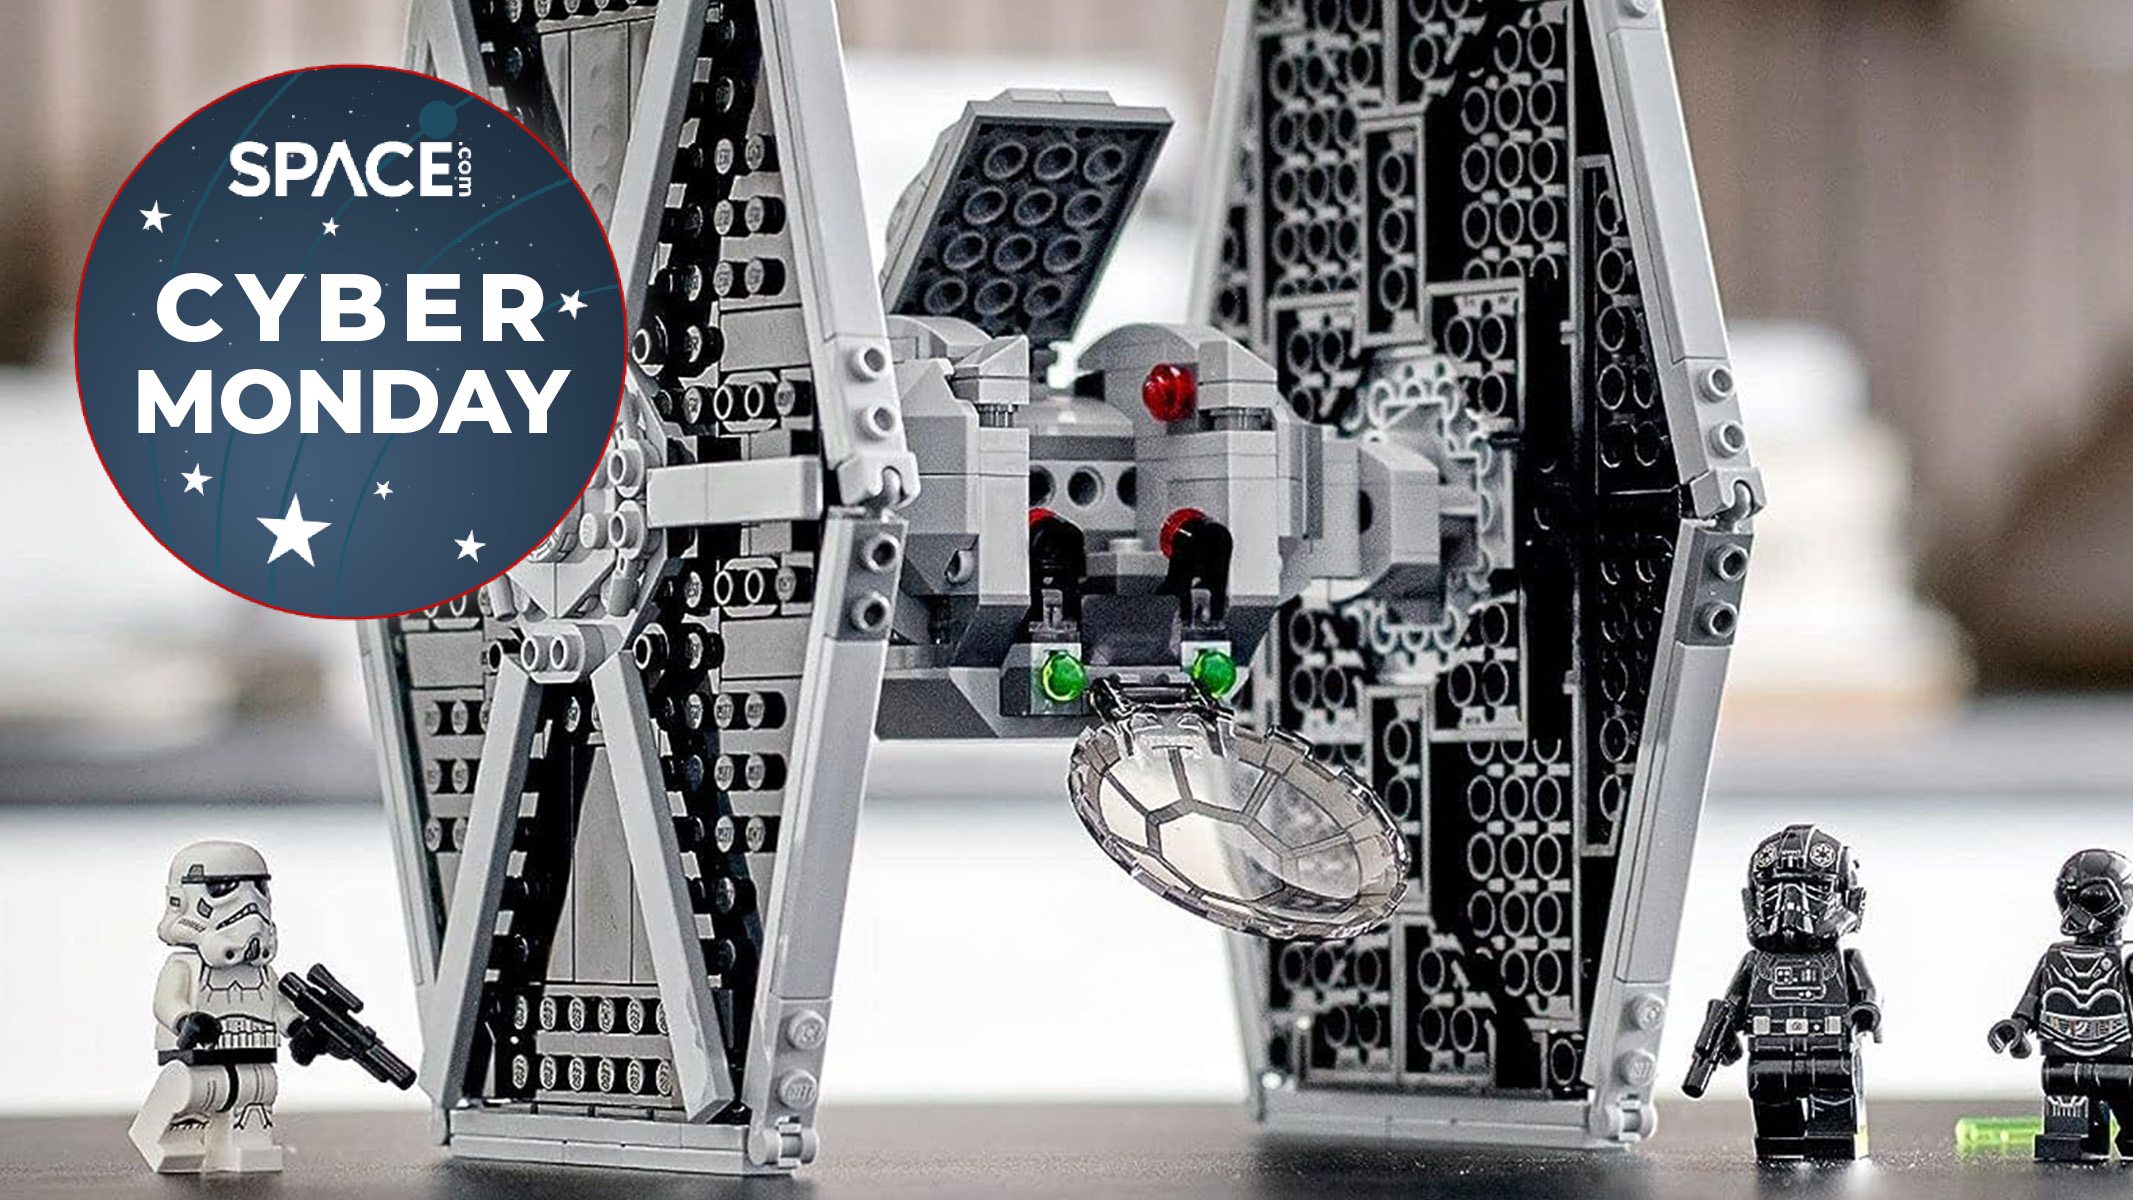 This Star Wars LEGO TIE Fighter is a perfect gift thanks to a Cyber Monday discount Space